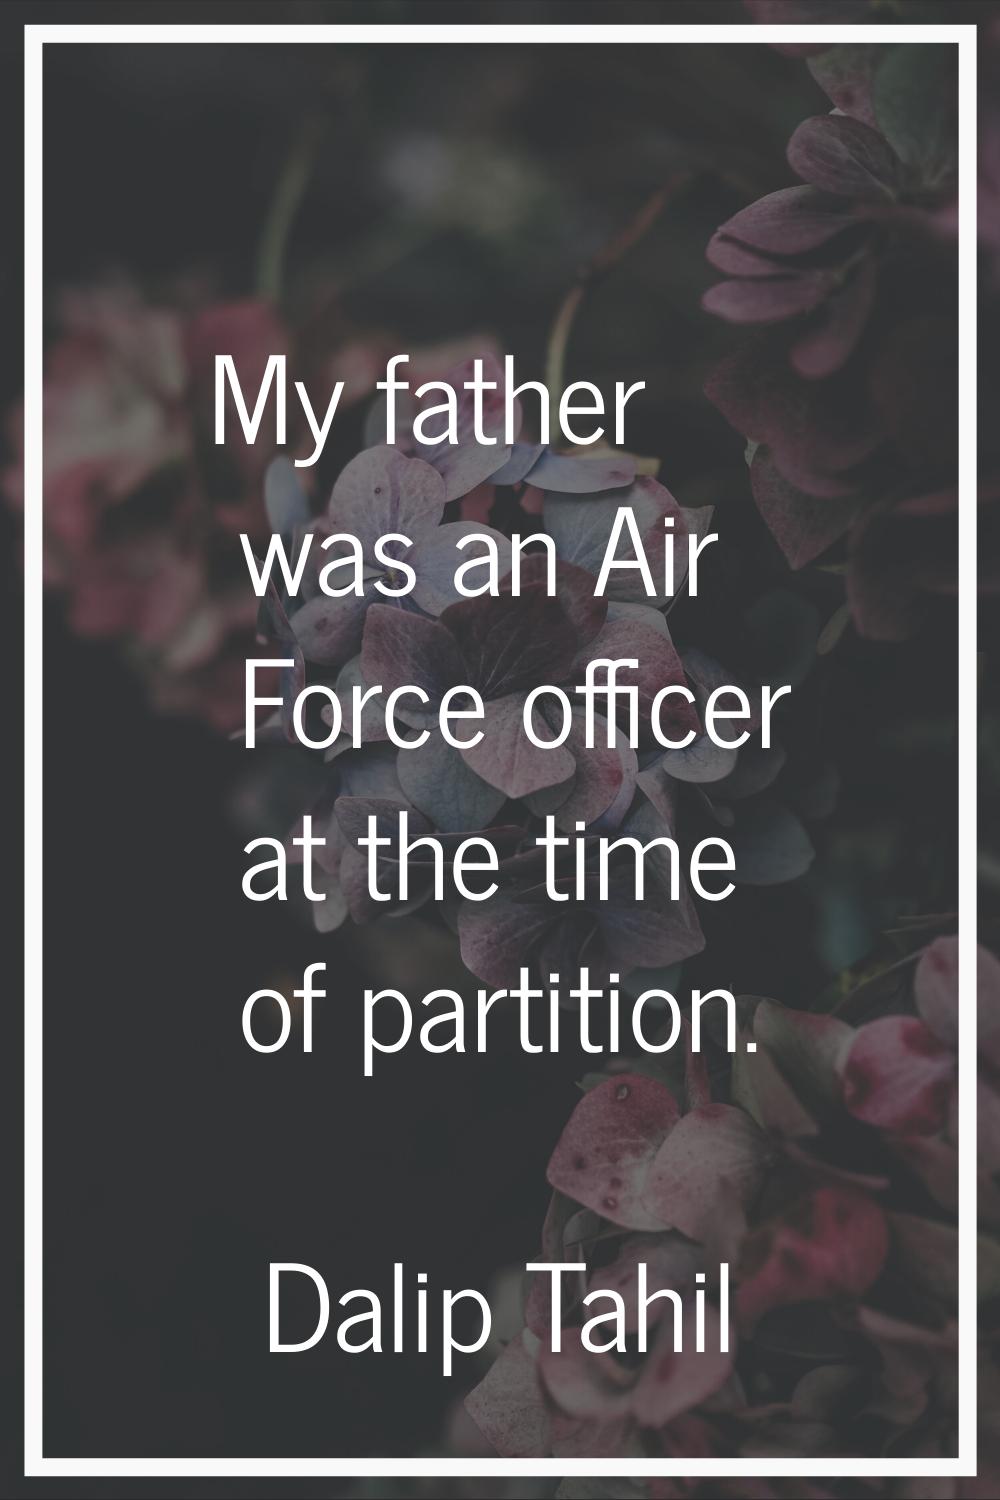 My father was an Air Force officer at the time of partition.